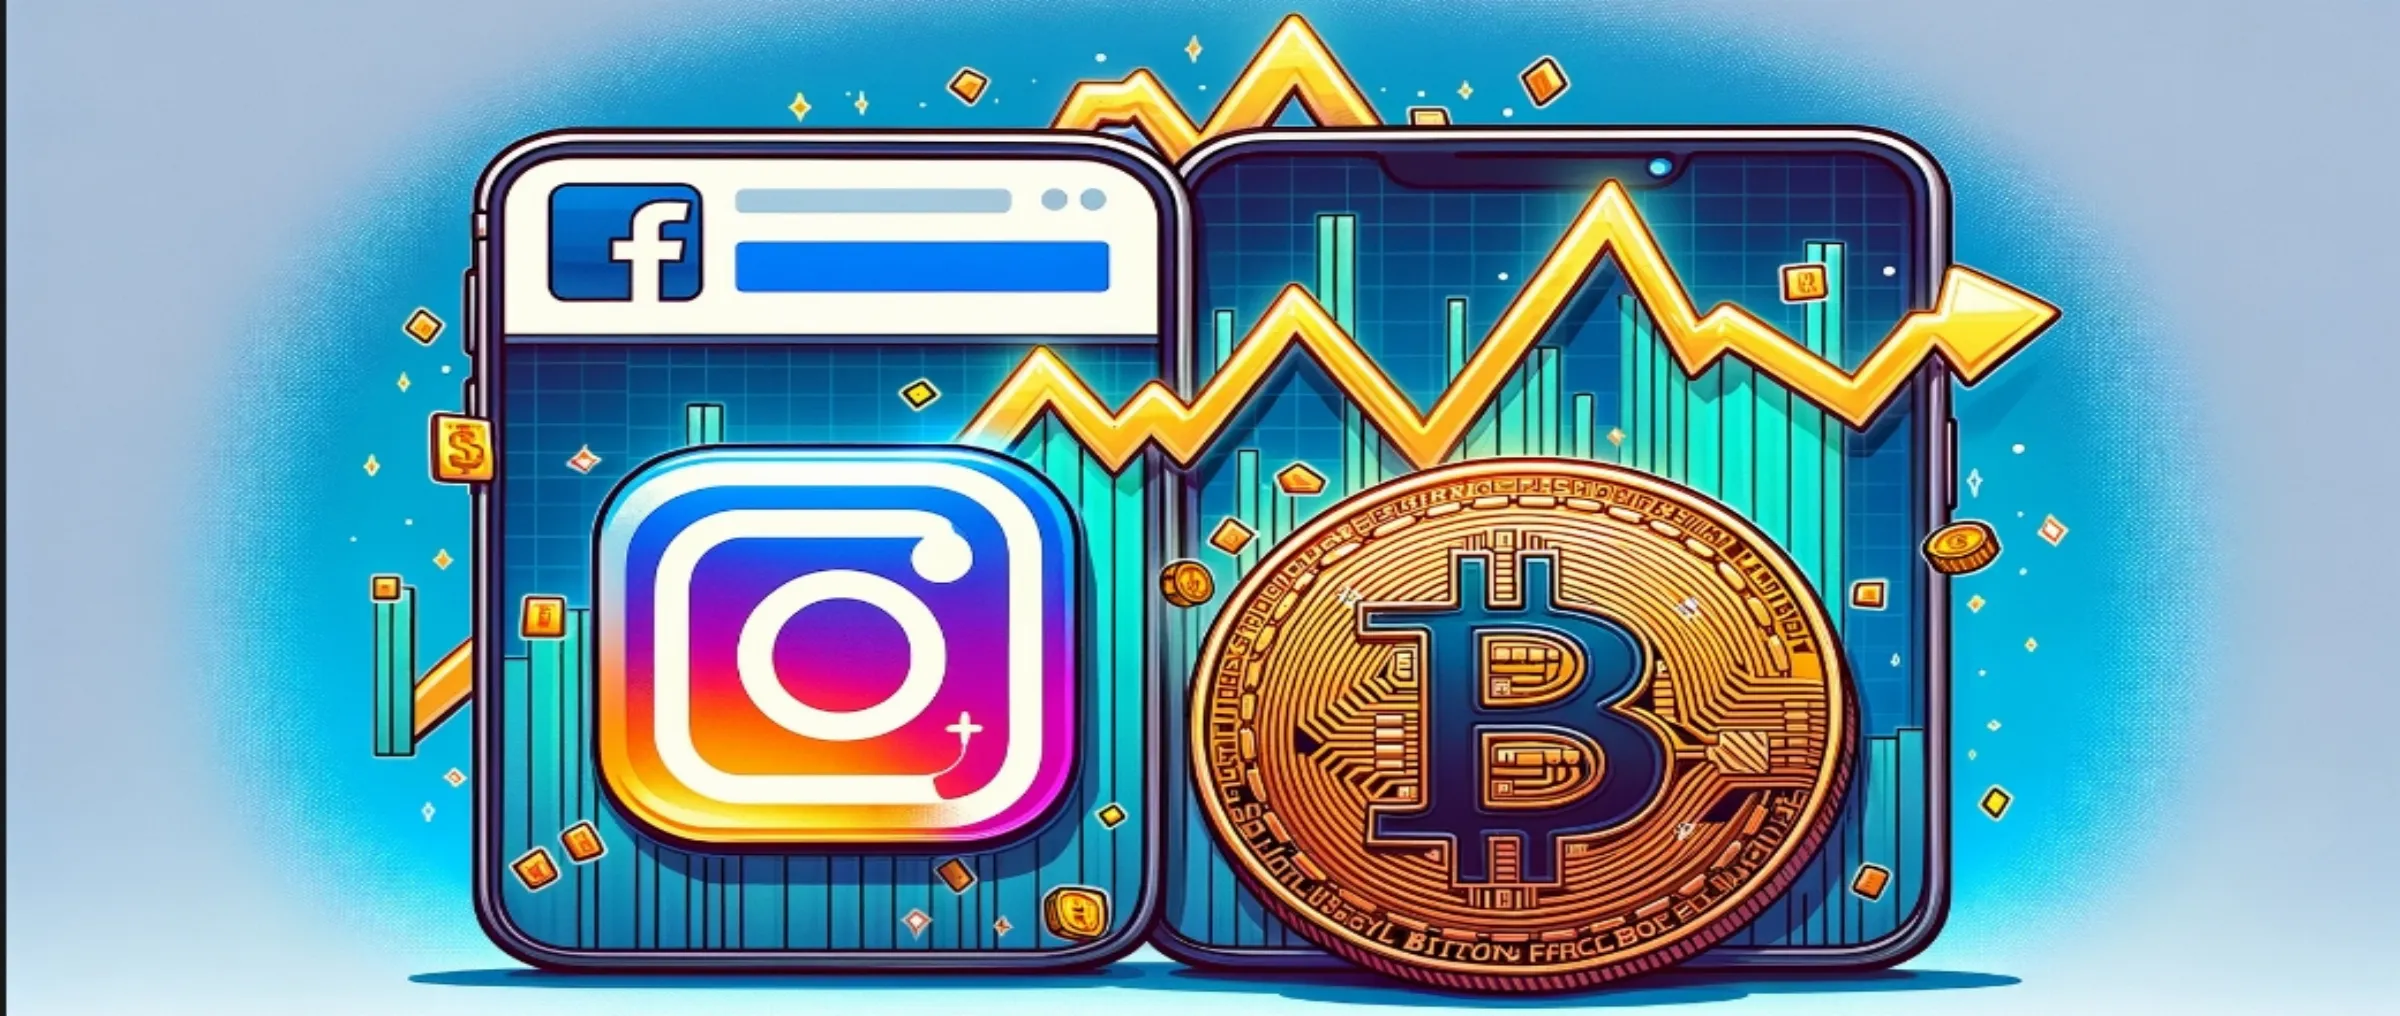 Meta will allow advertising of Bitcoin ETFs on Instagram and Facebook